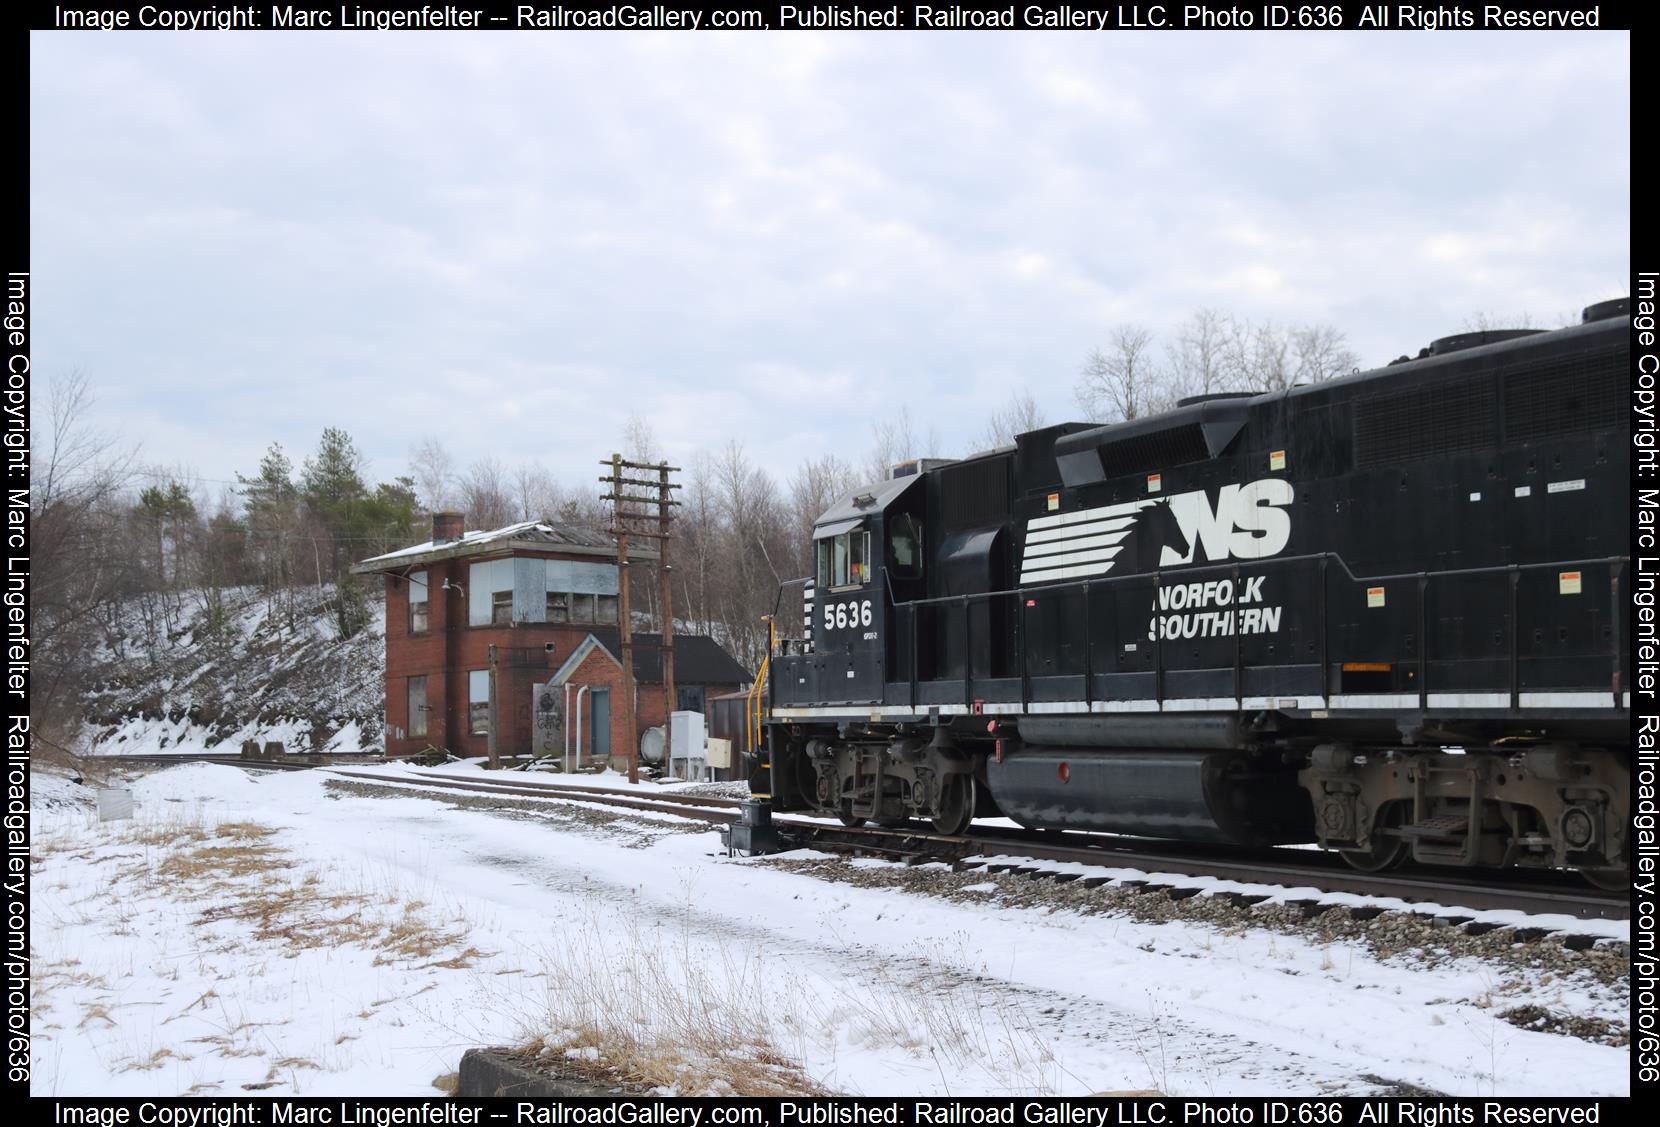 NS 5636 is a class EMD GP38-2 and  is pictured in Blairsville, Pennsylvania, USA.  This was taken along the NS Pittsburgh Line on the Norfolk Southern. Photo Copyright: Marc Lingenfelter uploaded to Railroad Gallery on 01/28/2023. This photograph of NS 5636 was taken on Thursday, March 02, 2017. All Rights Reserved. 